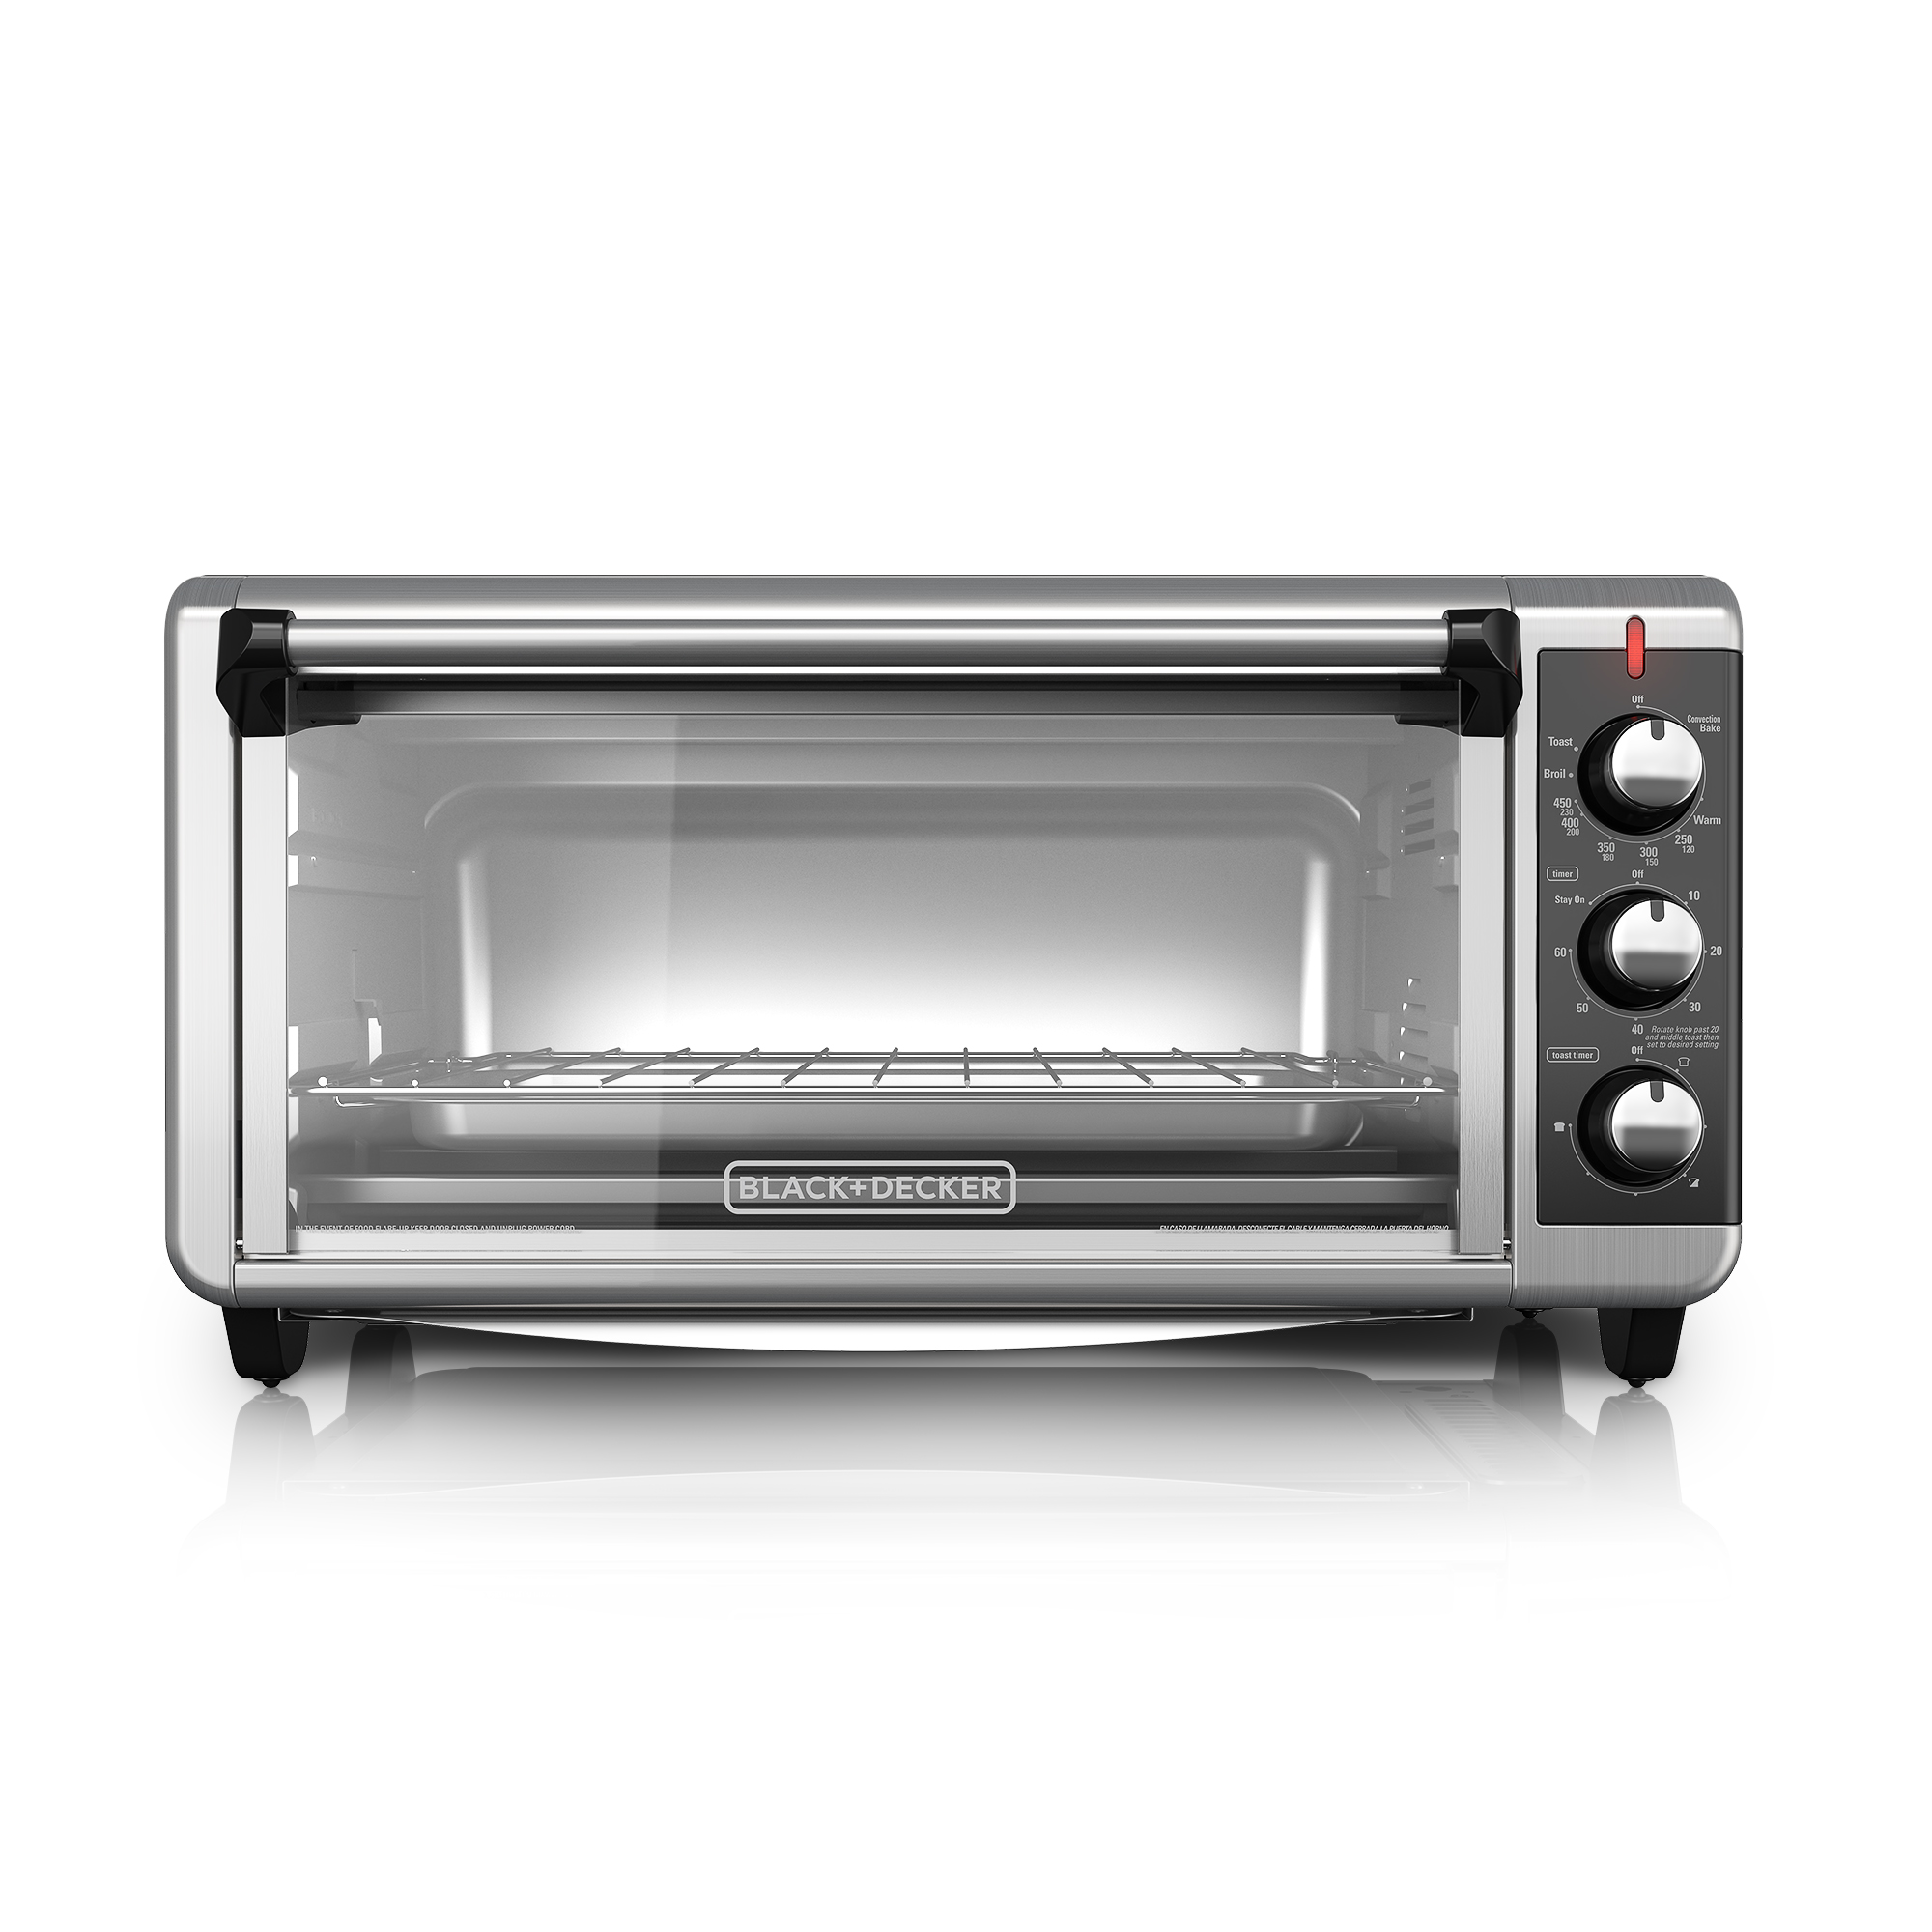 BLACK+DECKER 8-Slice Extra-Wide Stainless Steel/Black Convection Countertop Toaster Oven, Stainless Steel, TO3250XSB - image 5 of 14